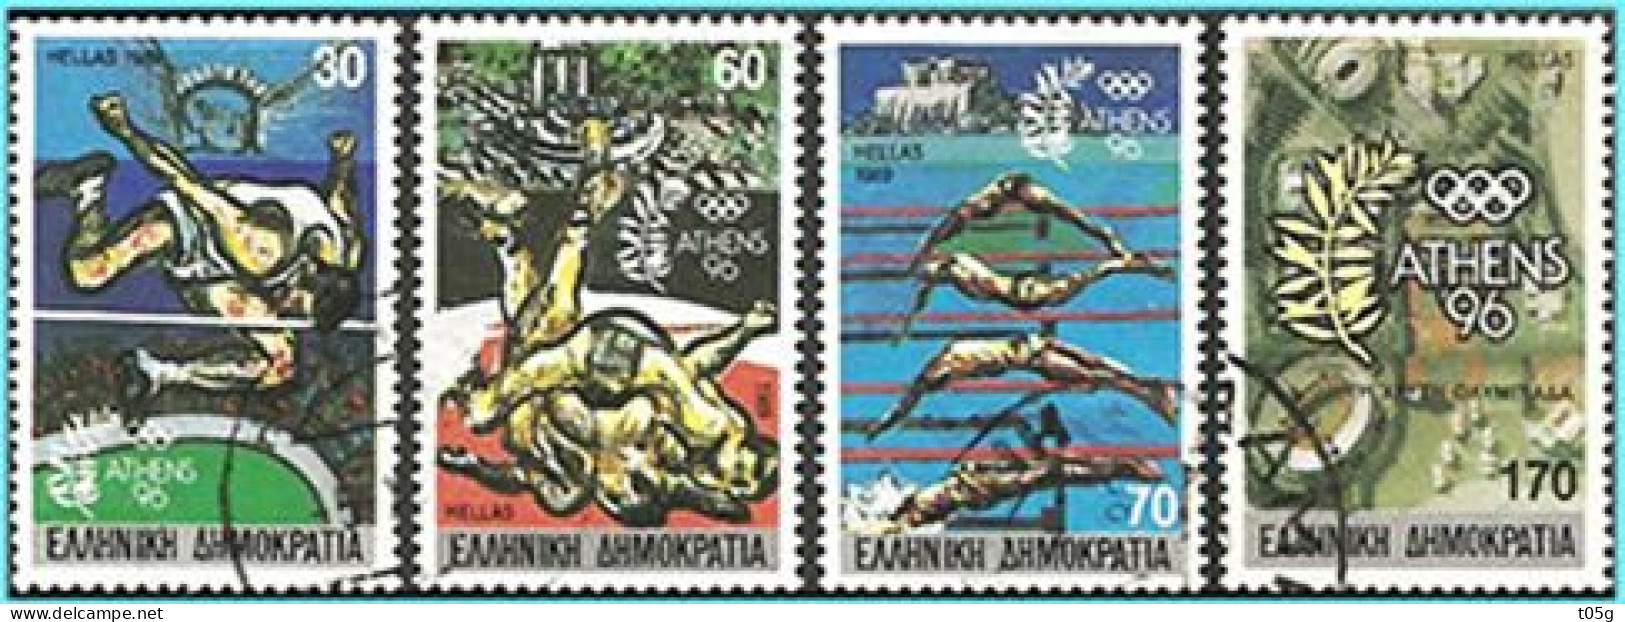 GREECE- GRECE- HELLAS 1989: Complet Set Used - Used Stamps